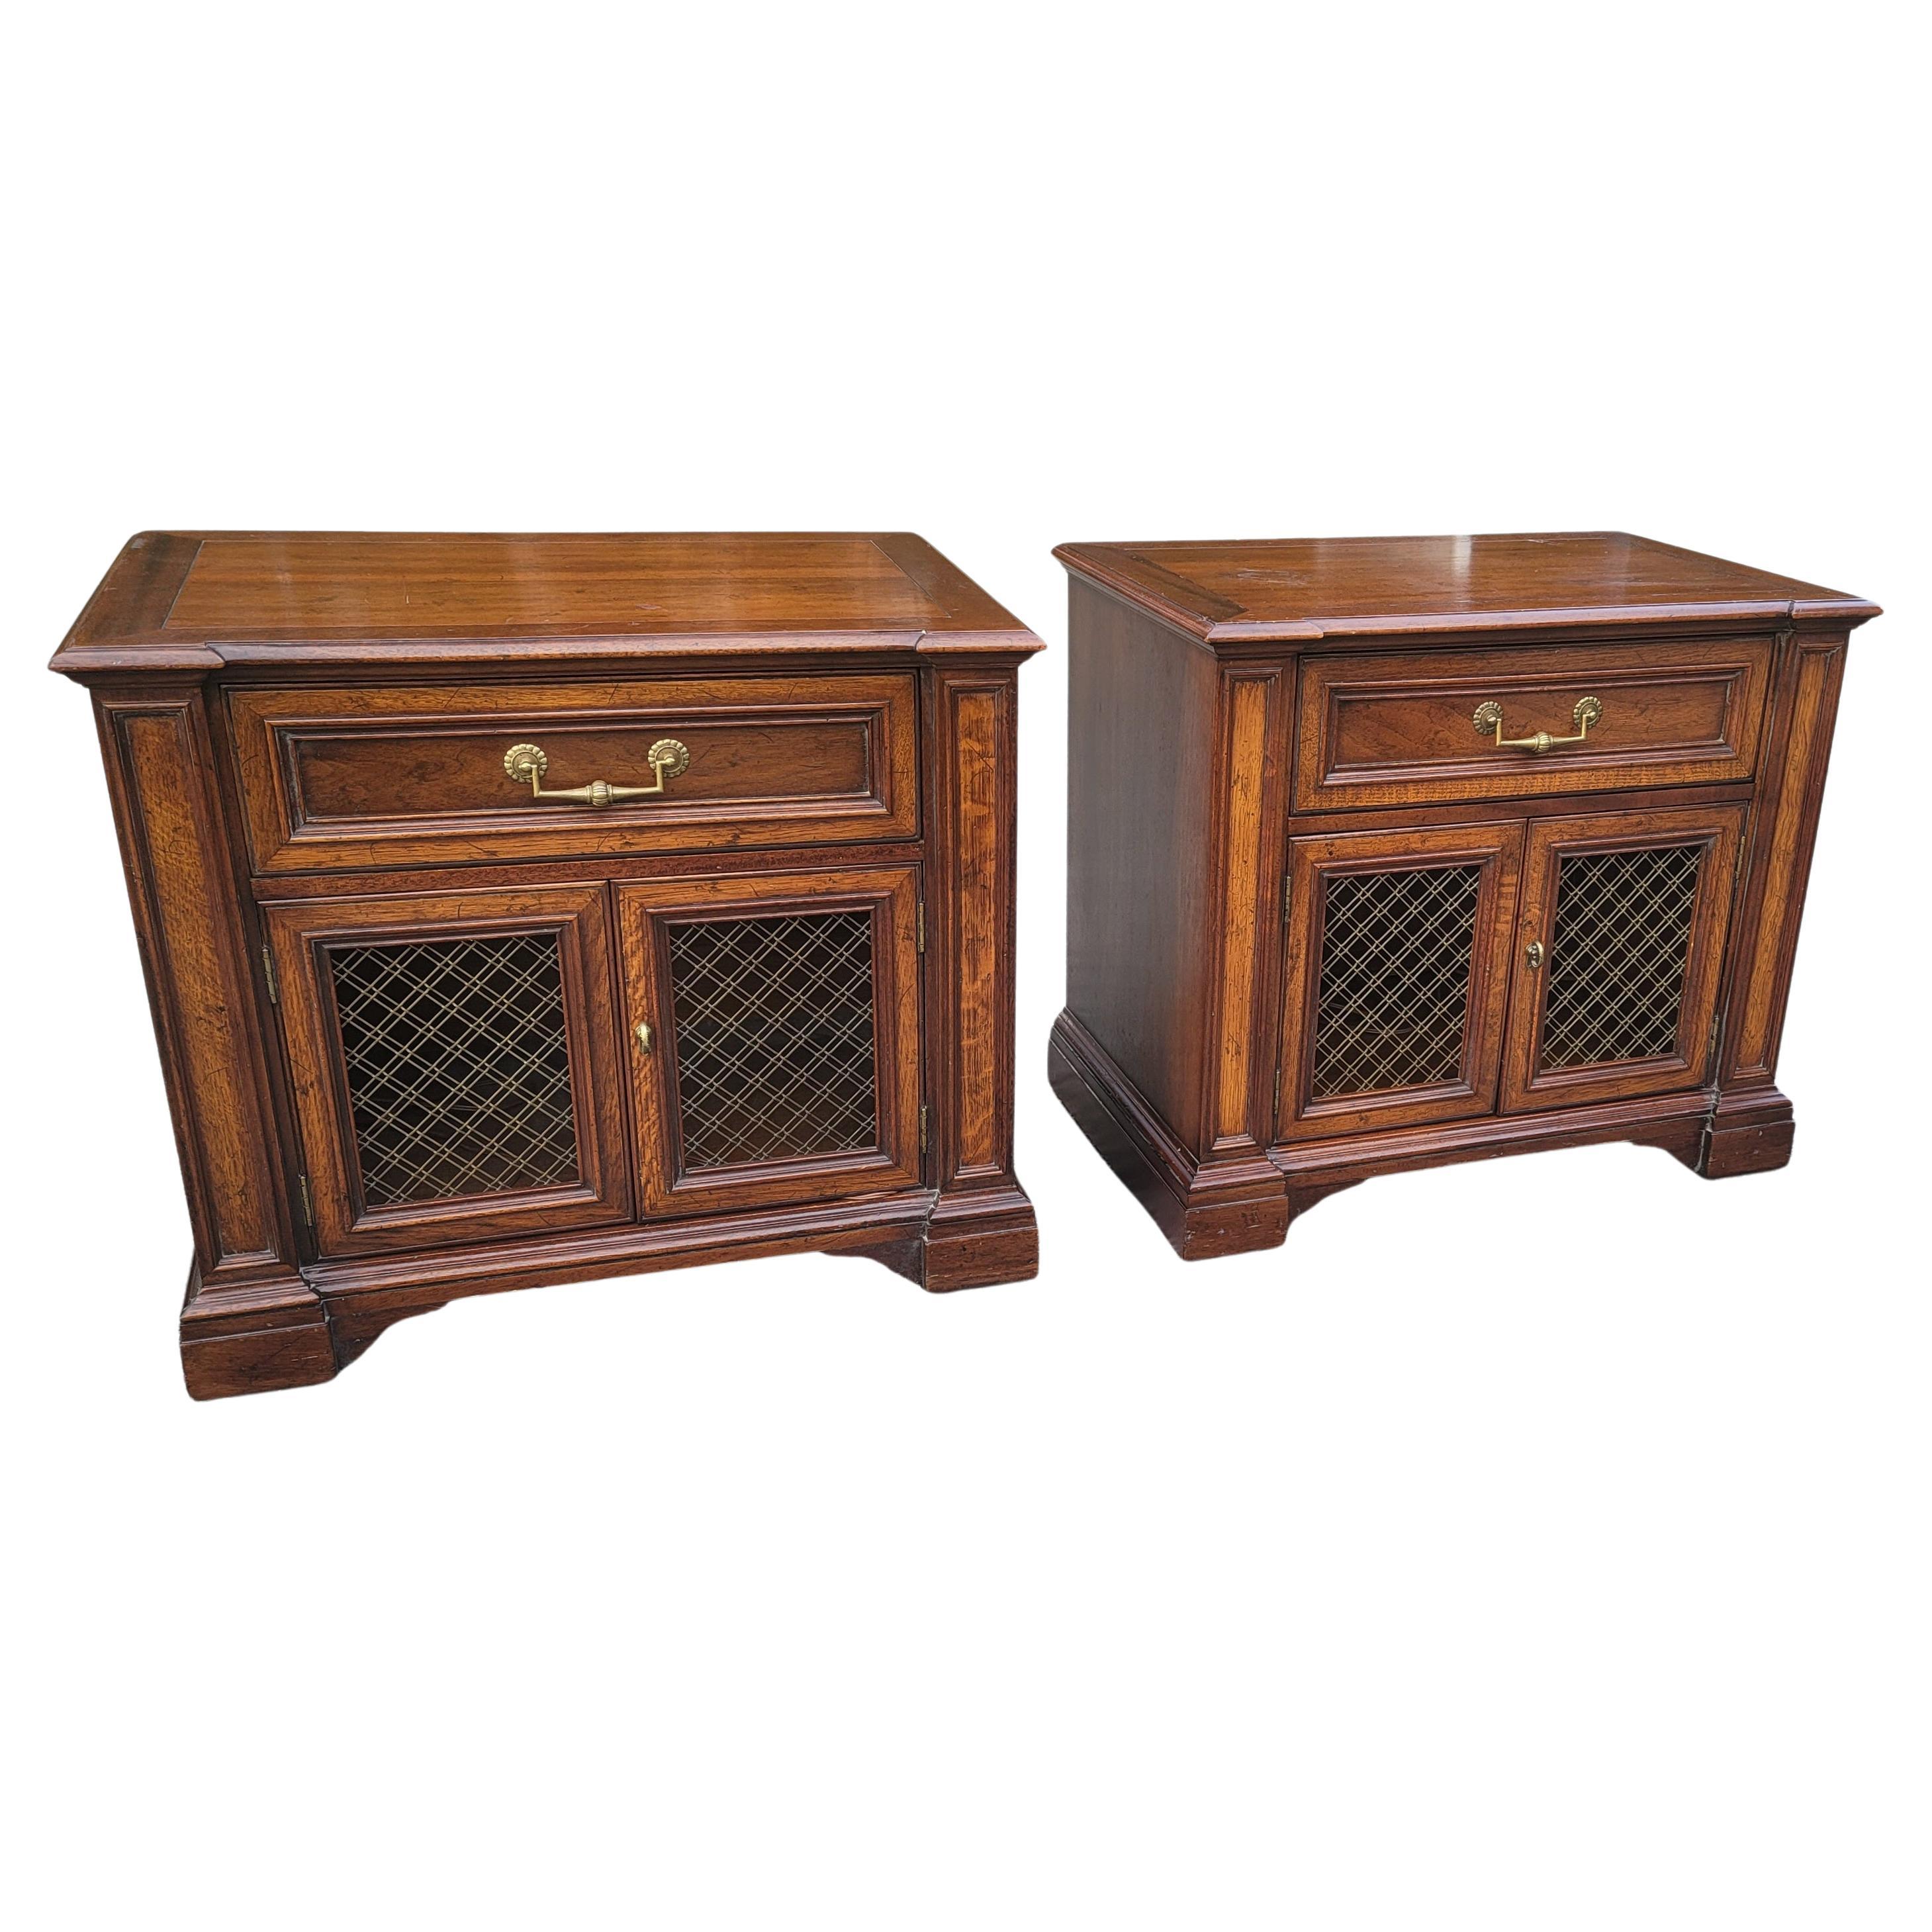 A beautiful pair of Henredon Fine Furniture French Wire Mesh Bedside Tables in good vintage condition. Built with and astonishing combination of solid walnut and mission oak woods. Measure 28